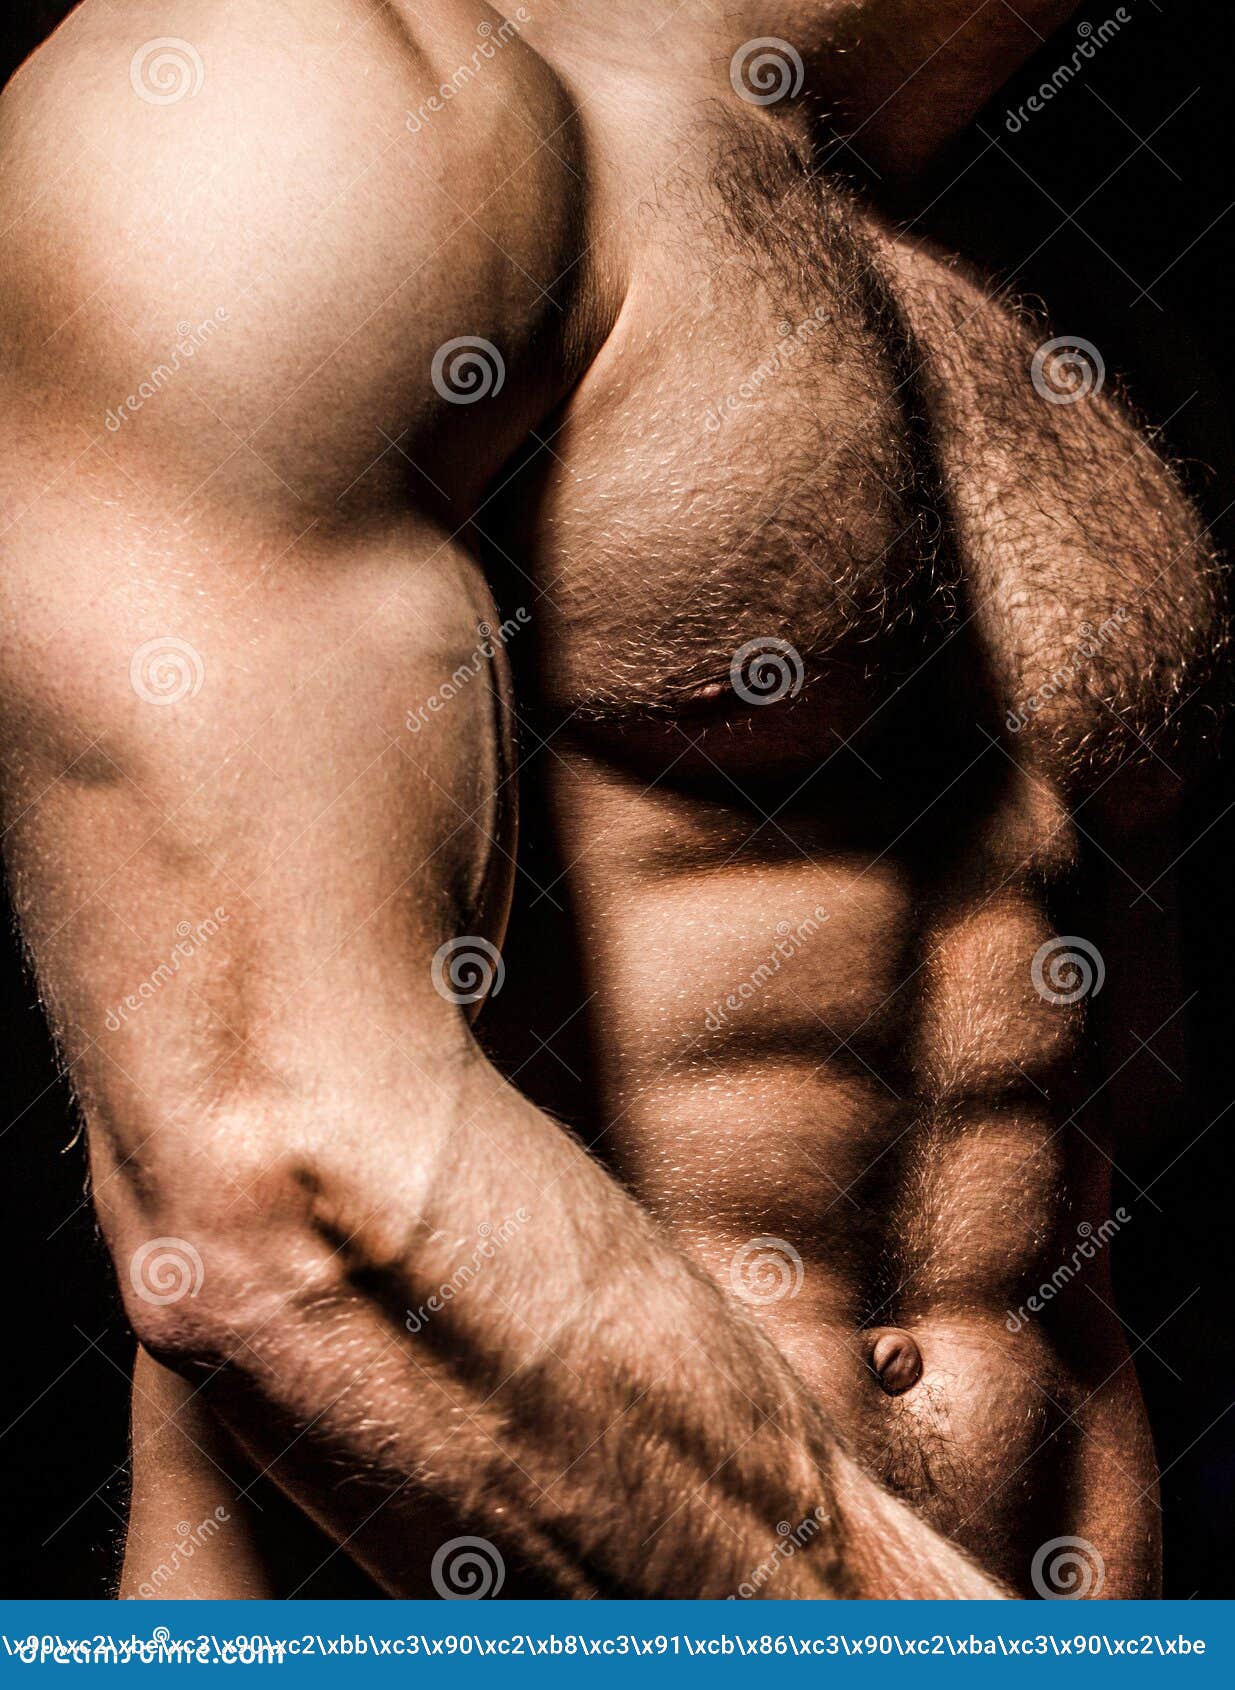 Male athletic nude Serch Results